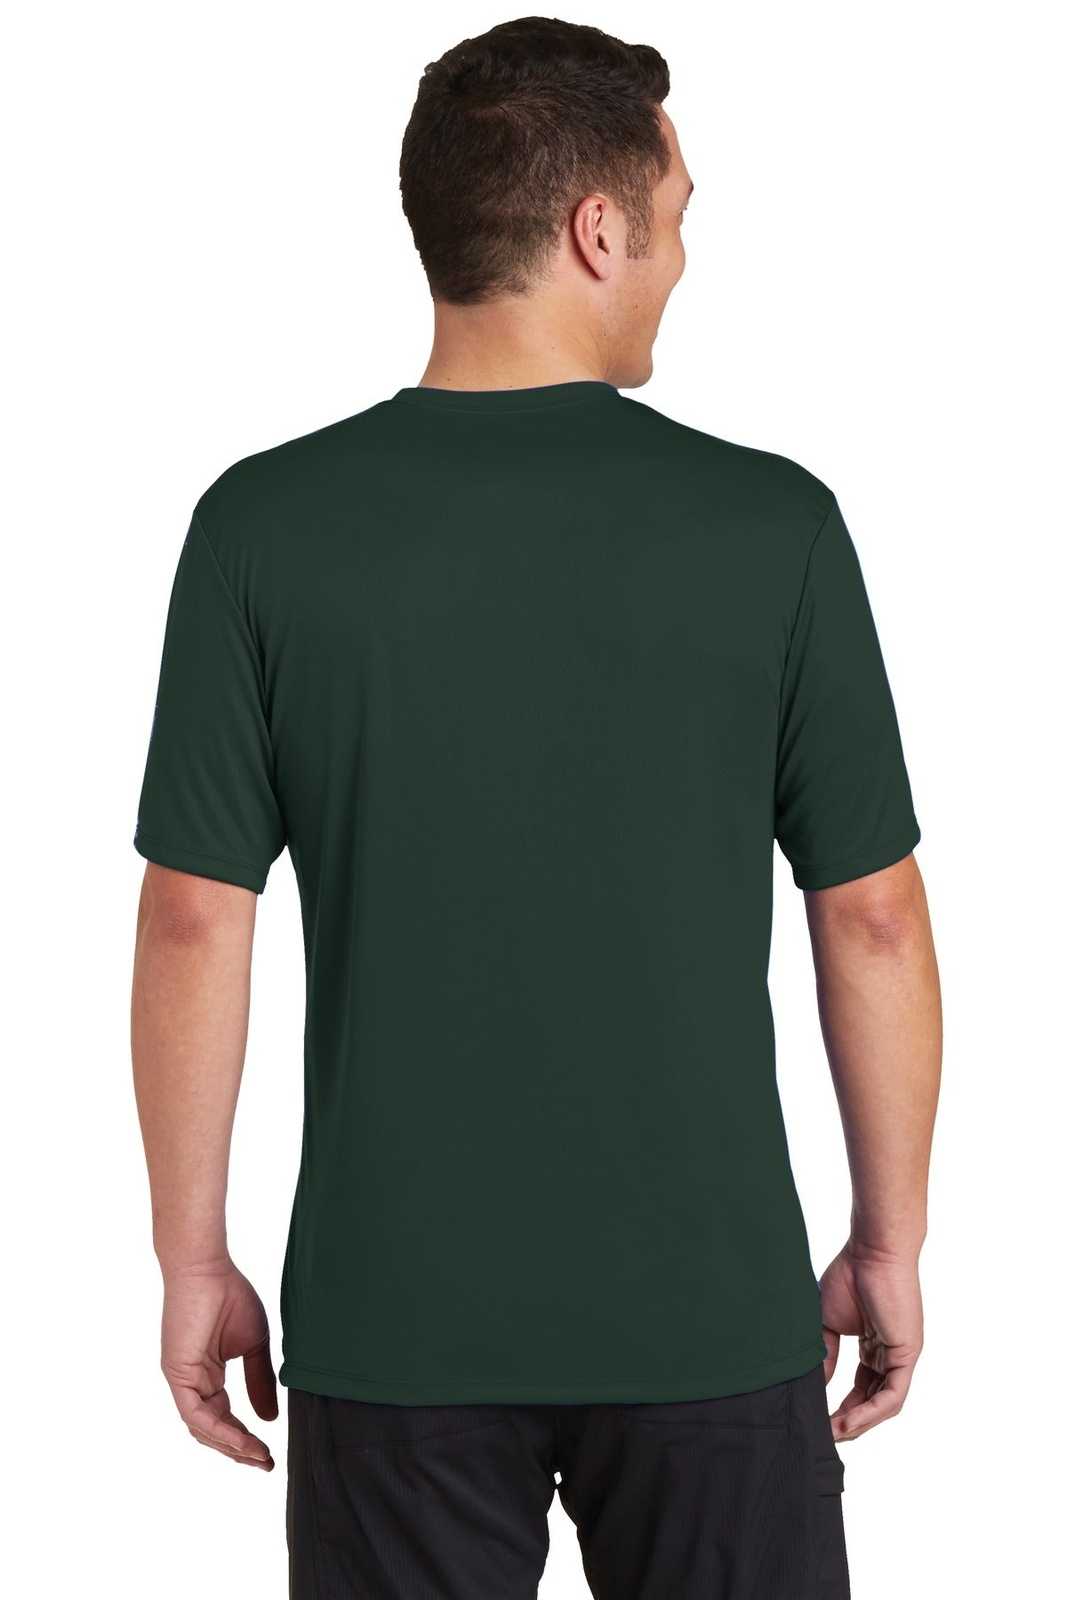 Hanes 4820 Cool Dri Performance T-Shirt - Deep Forest - HIT a Double